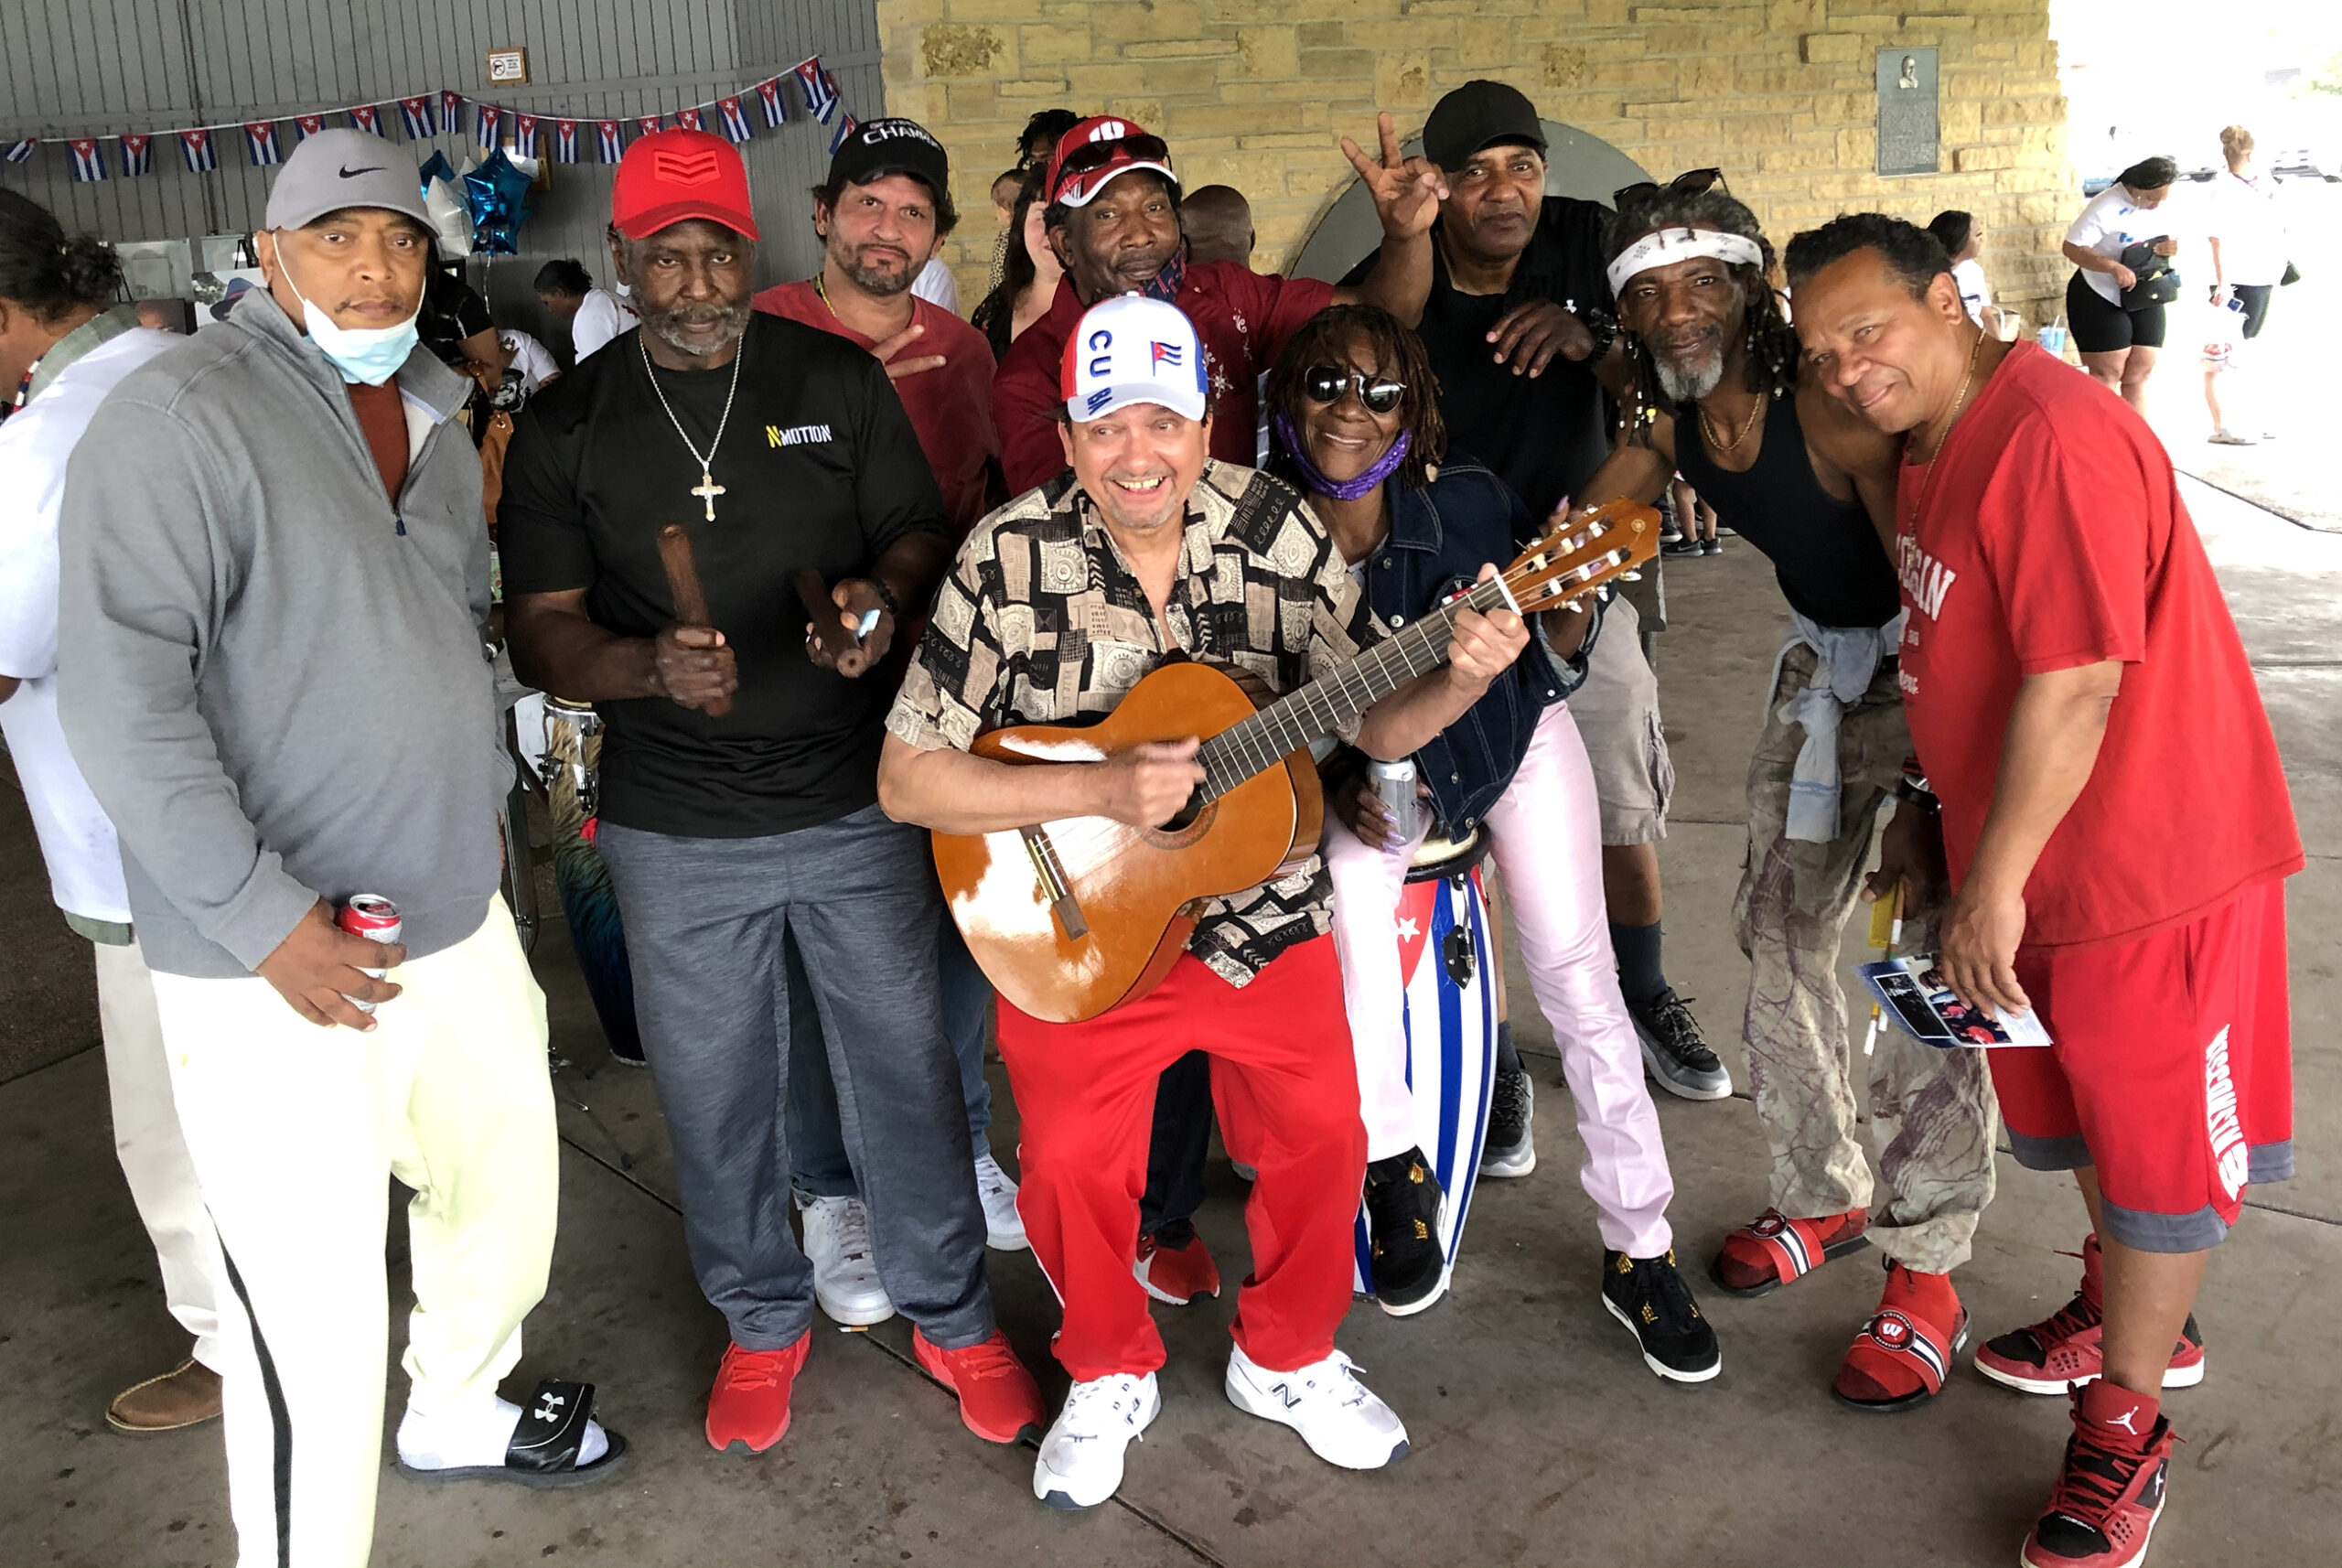 Wisconsin Cubans gather at Brittingham Park in Madison and play music